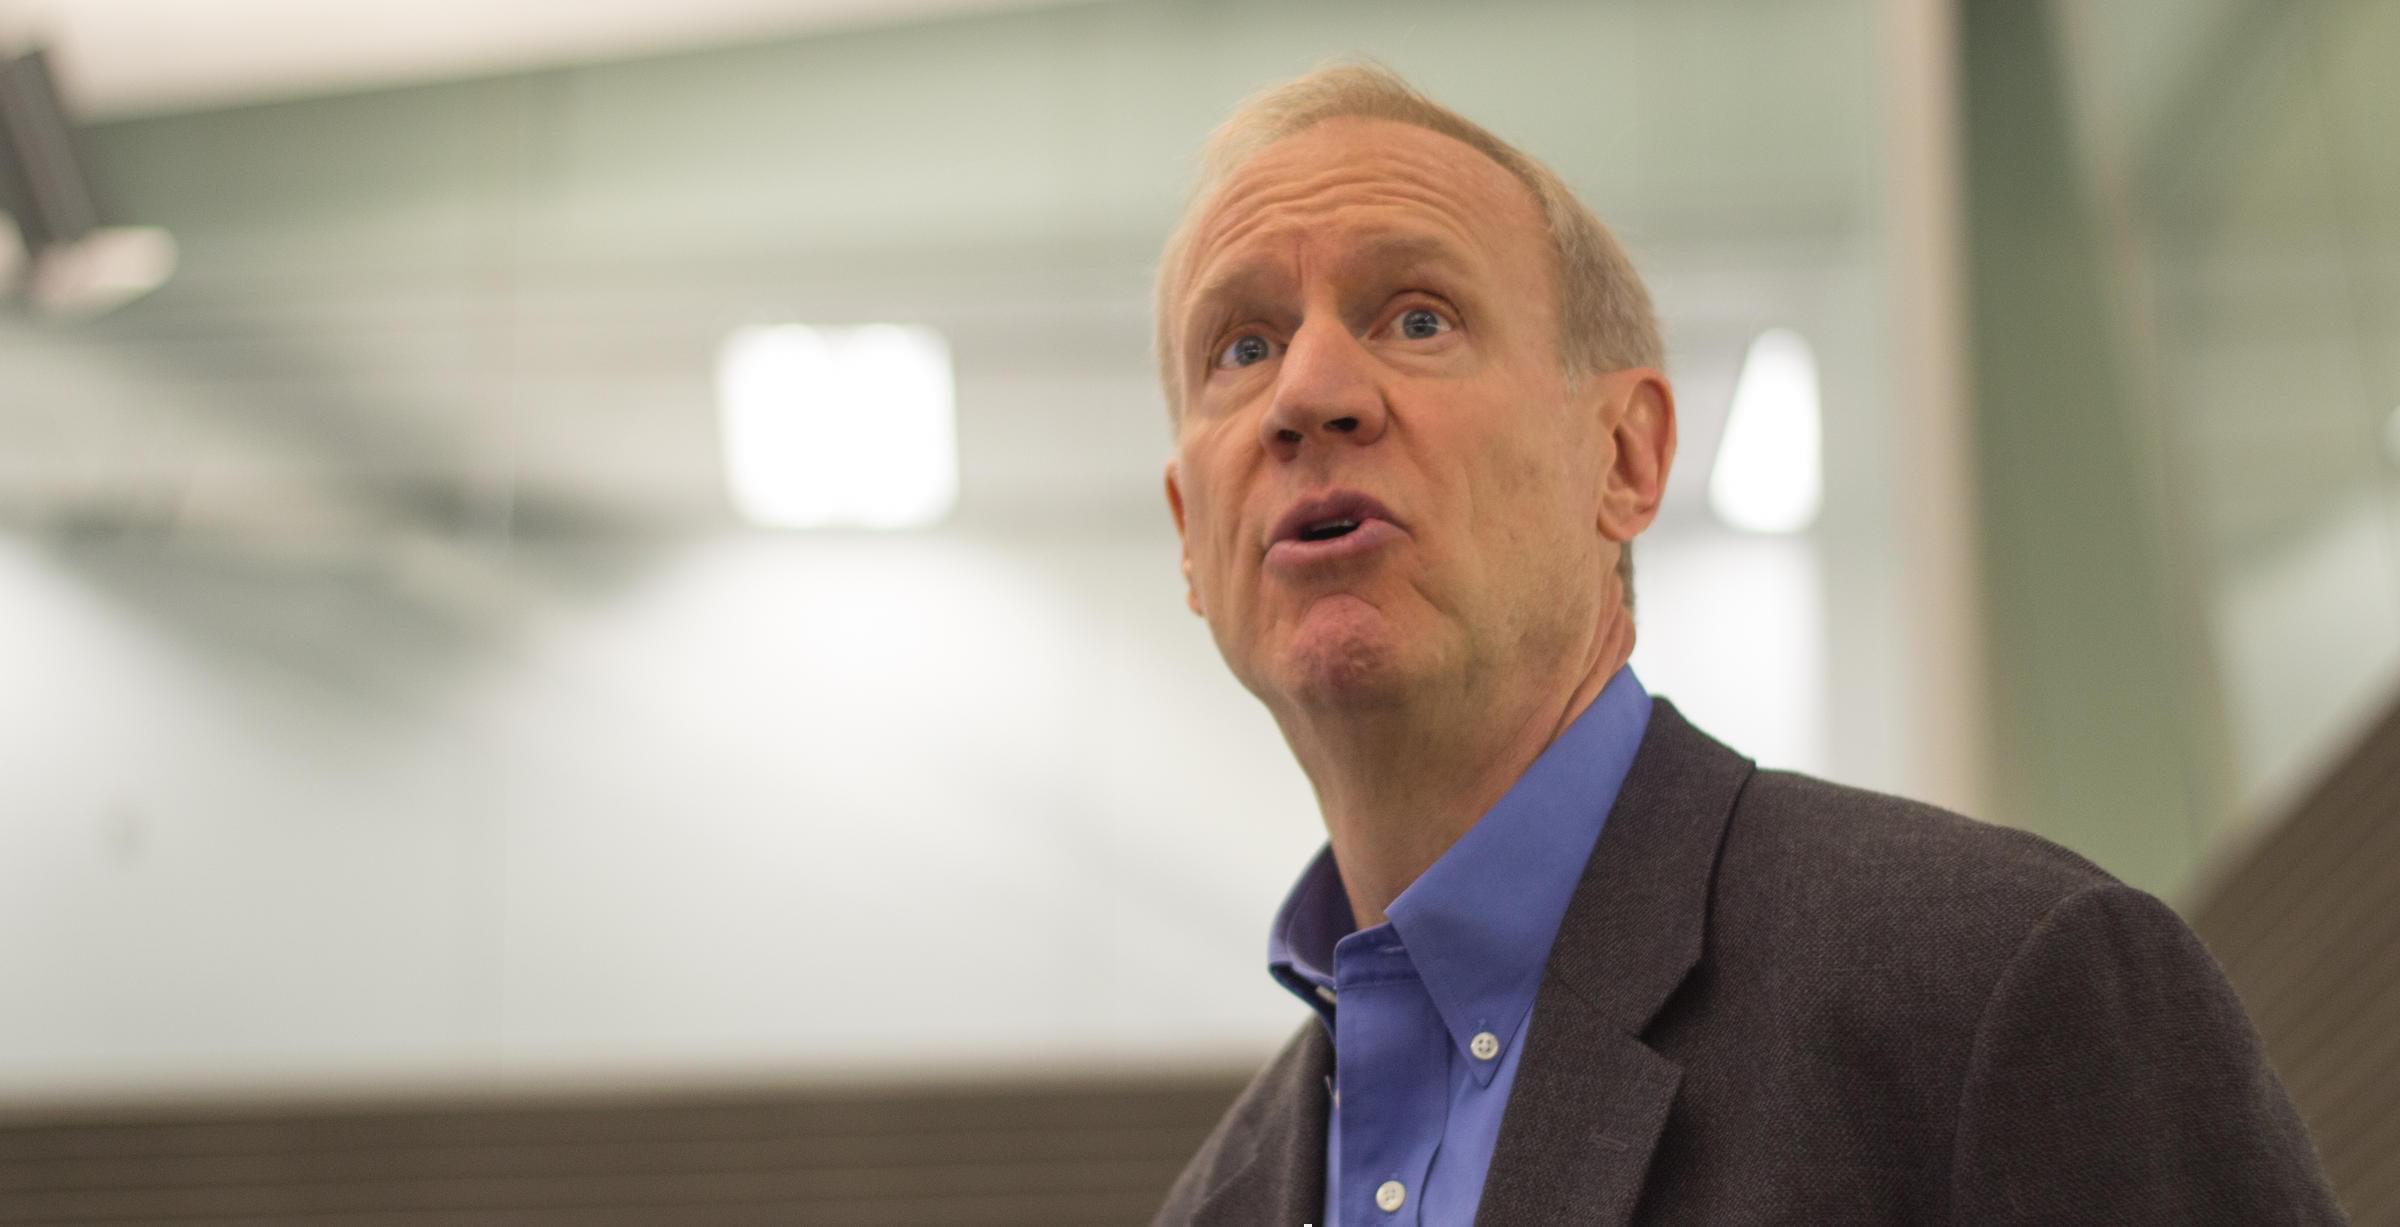 Gov. Bruce Rauner addresses employees at the Illinois Emergency Management Agency in this 2015 file photo.